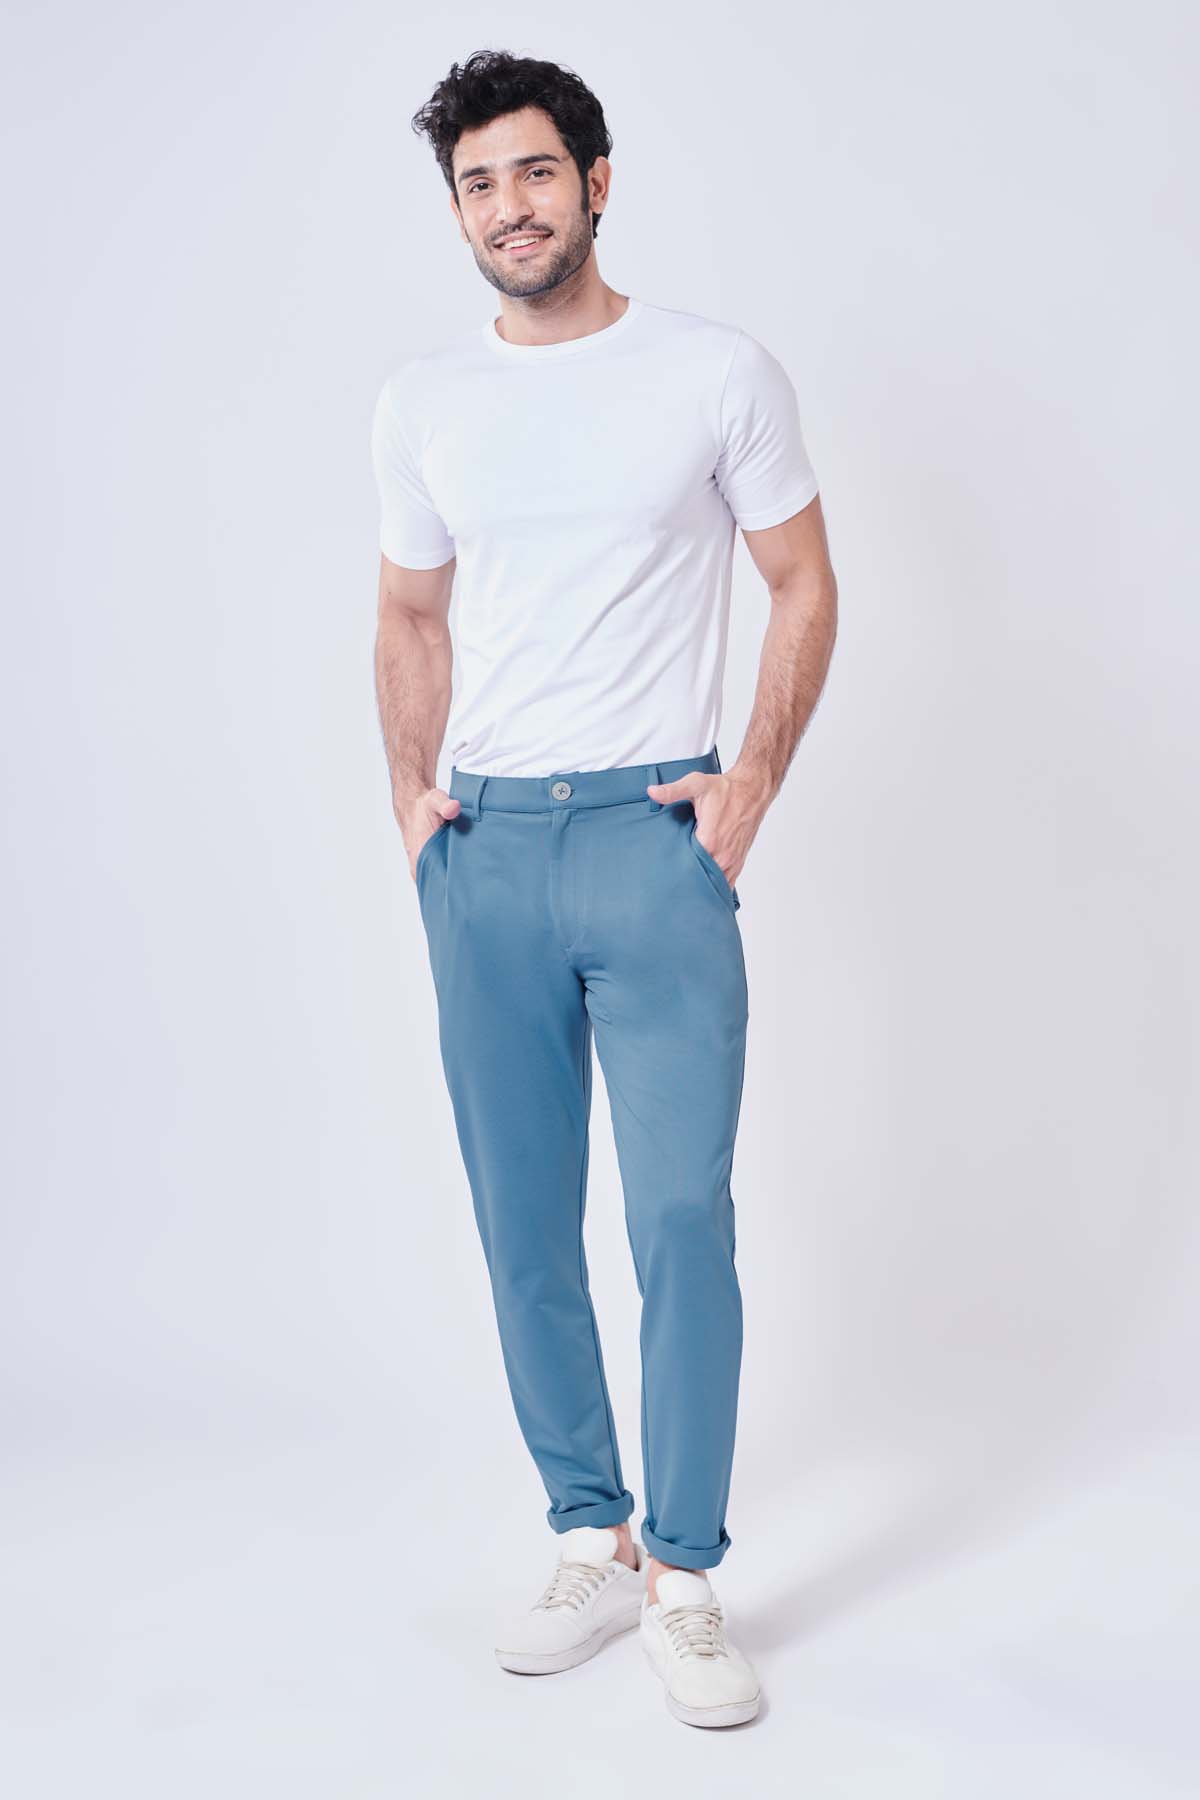 Buy Regular Trouser Pants Beige Sky Blue and Navy Blue Combo of 3 Cotton  for Best Price, Reviews, Free Shipping